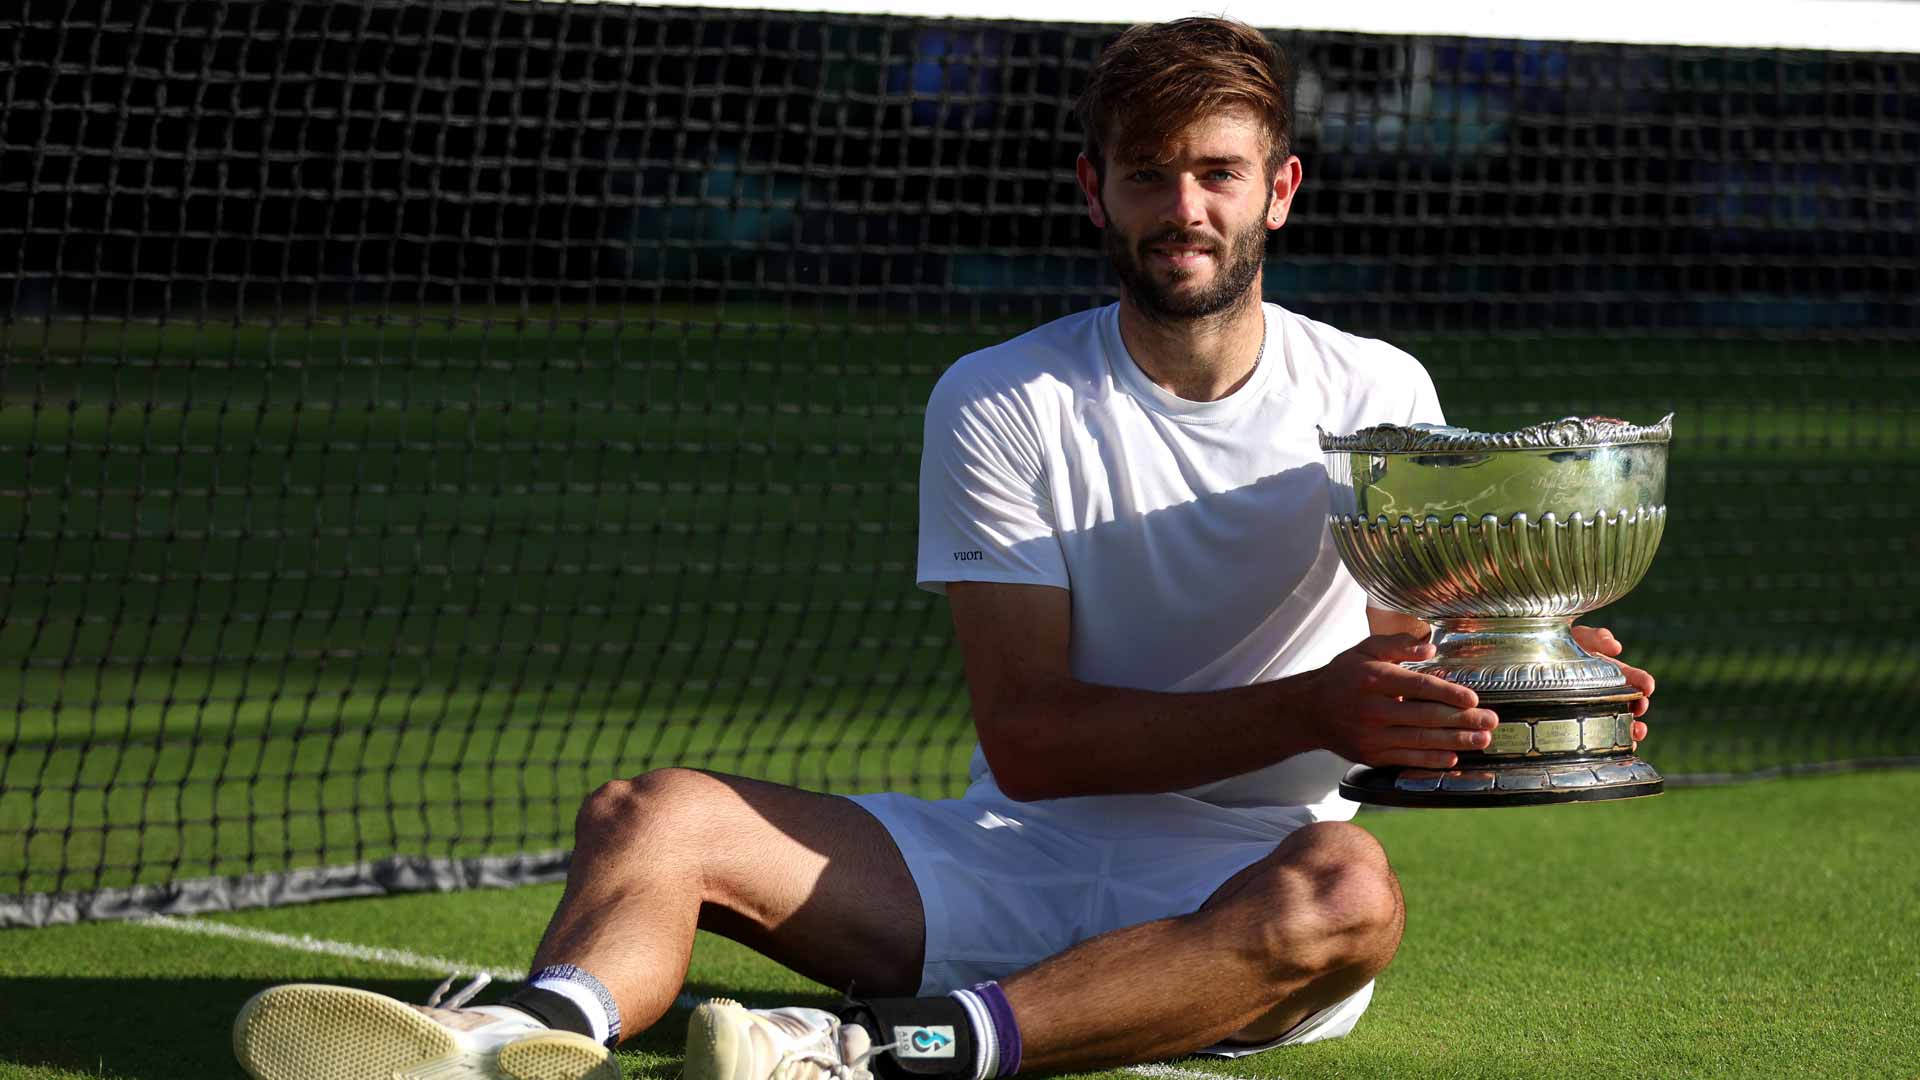 <a href='https://www.atptour.com/en/players/jacob-fearnley/f0by/overview'>Jacob Fearnley</a> wins the Nottingham Challenger.